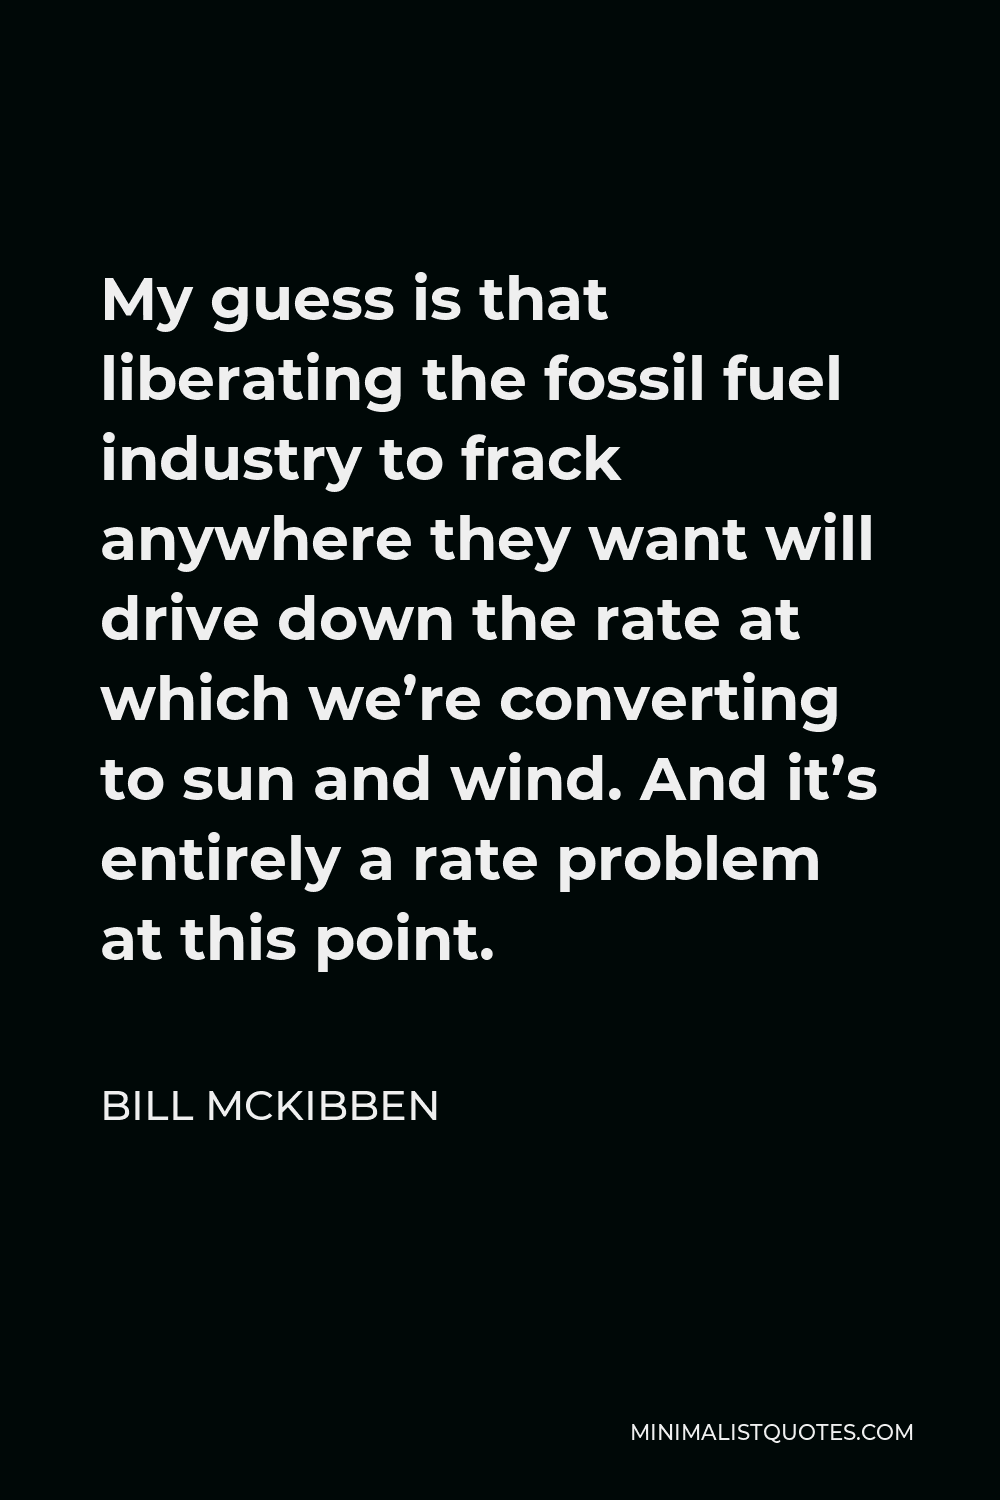 Bill McKibben Quote - My guess is that liberating the fossil fuel industry to frack anywhere they want will drive down the rate at which we’re converting to sun and wind. And it’s entirely a rate problem at this point.